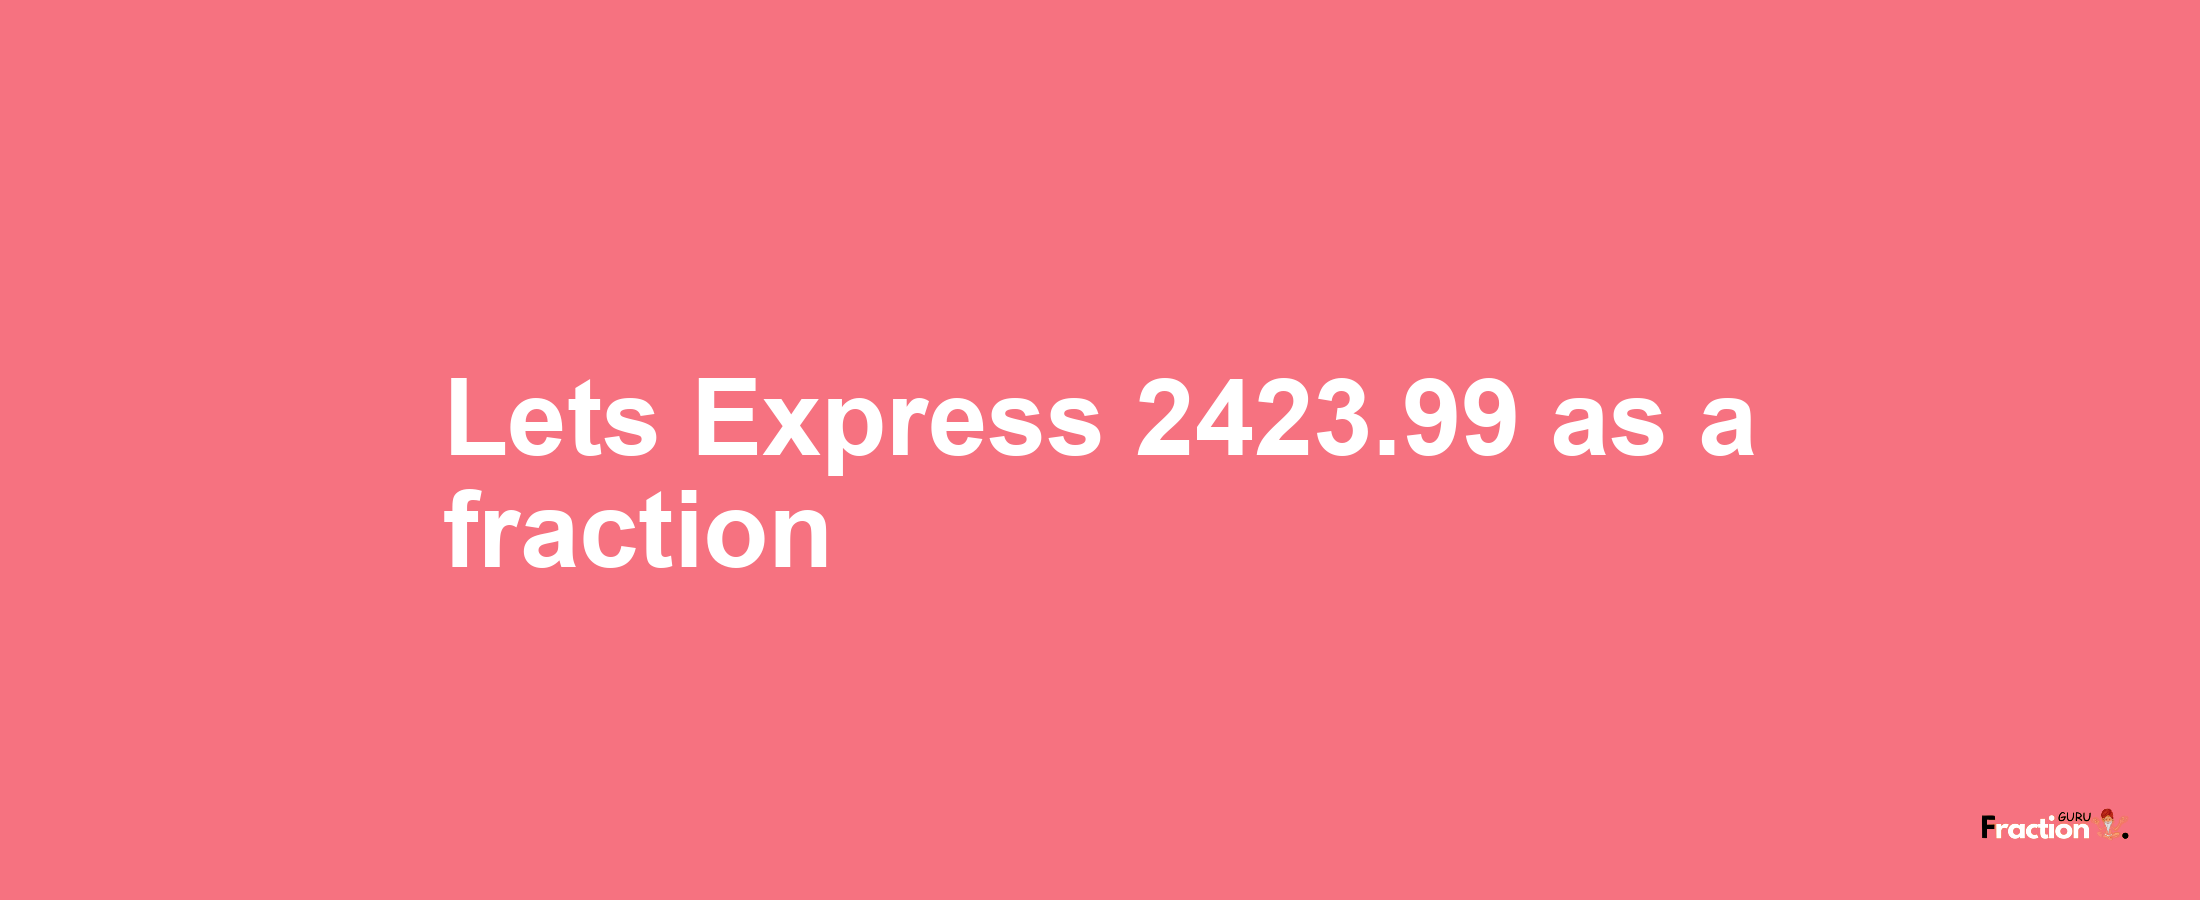 Lets Express 2423.99 as afraction